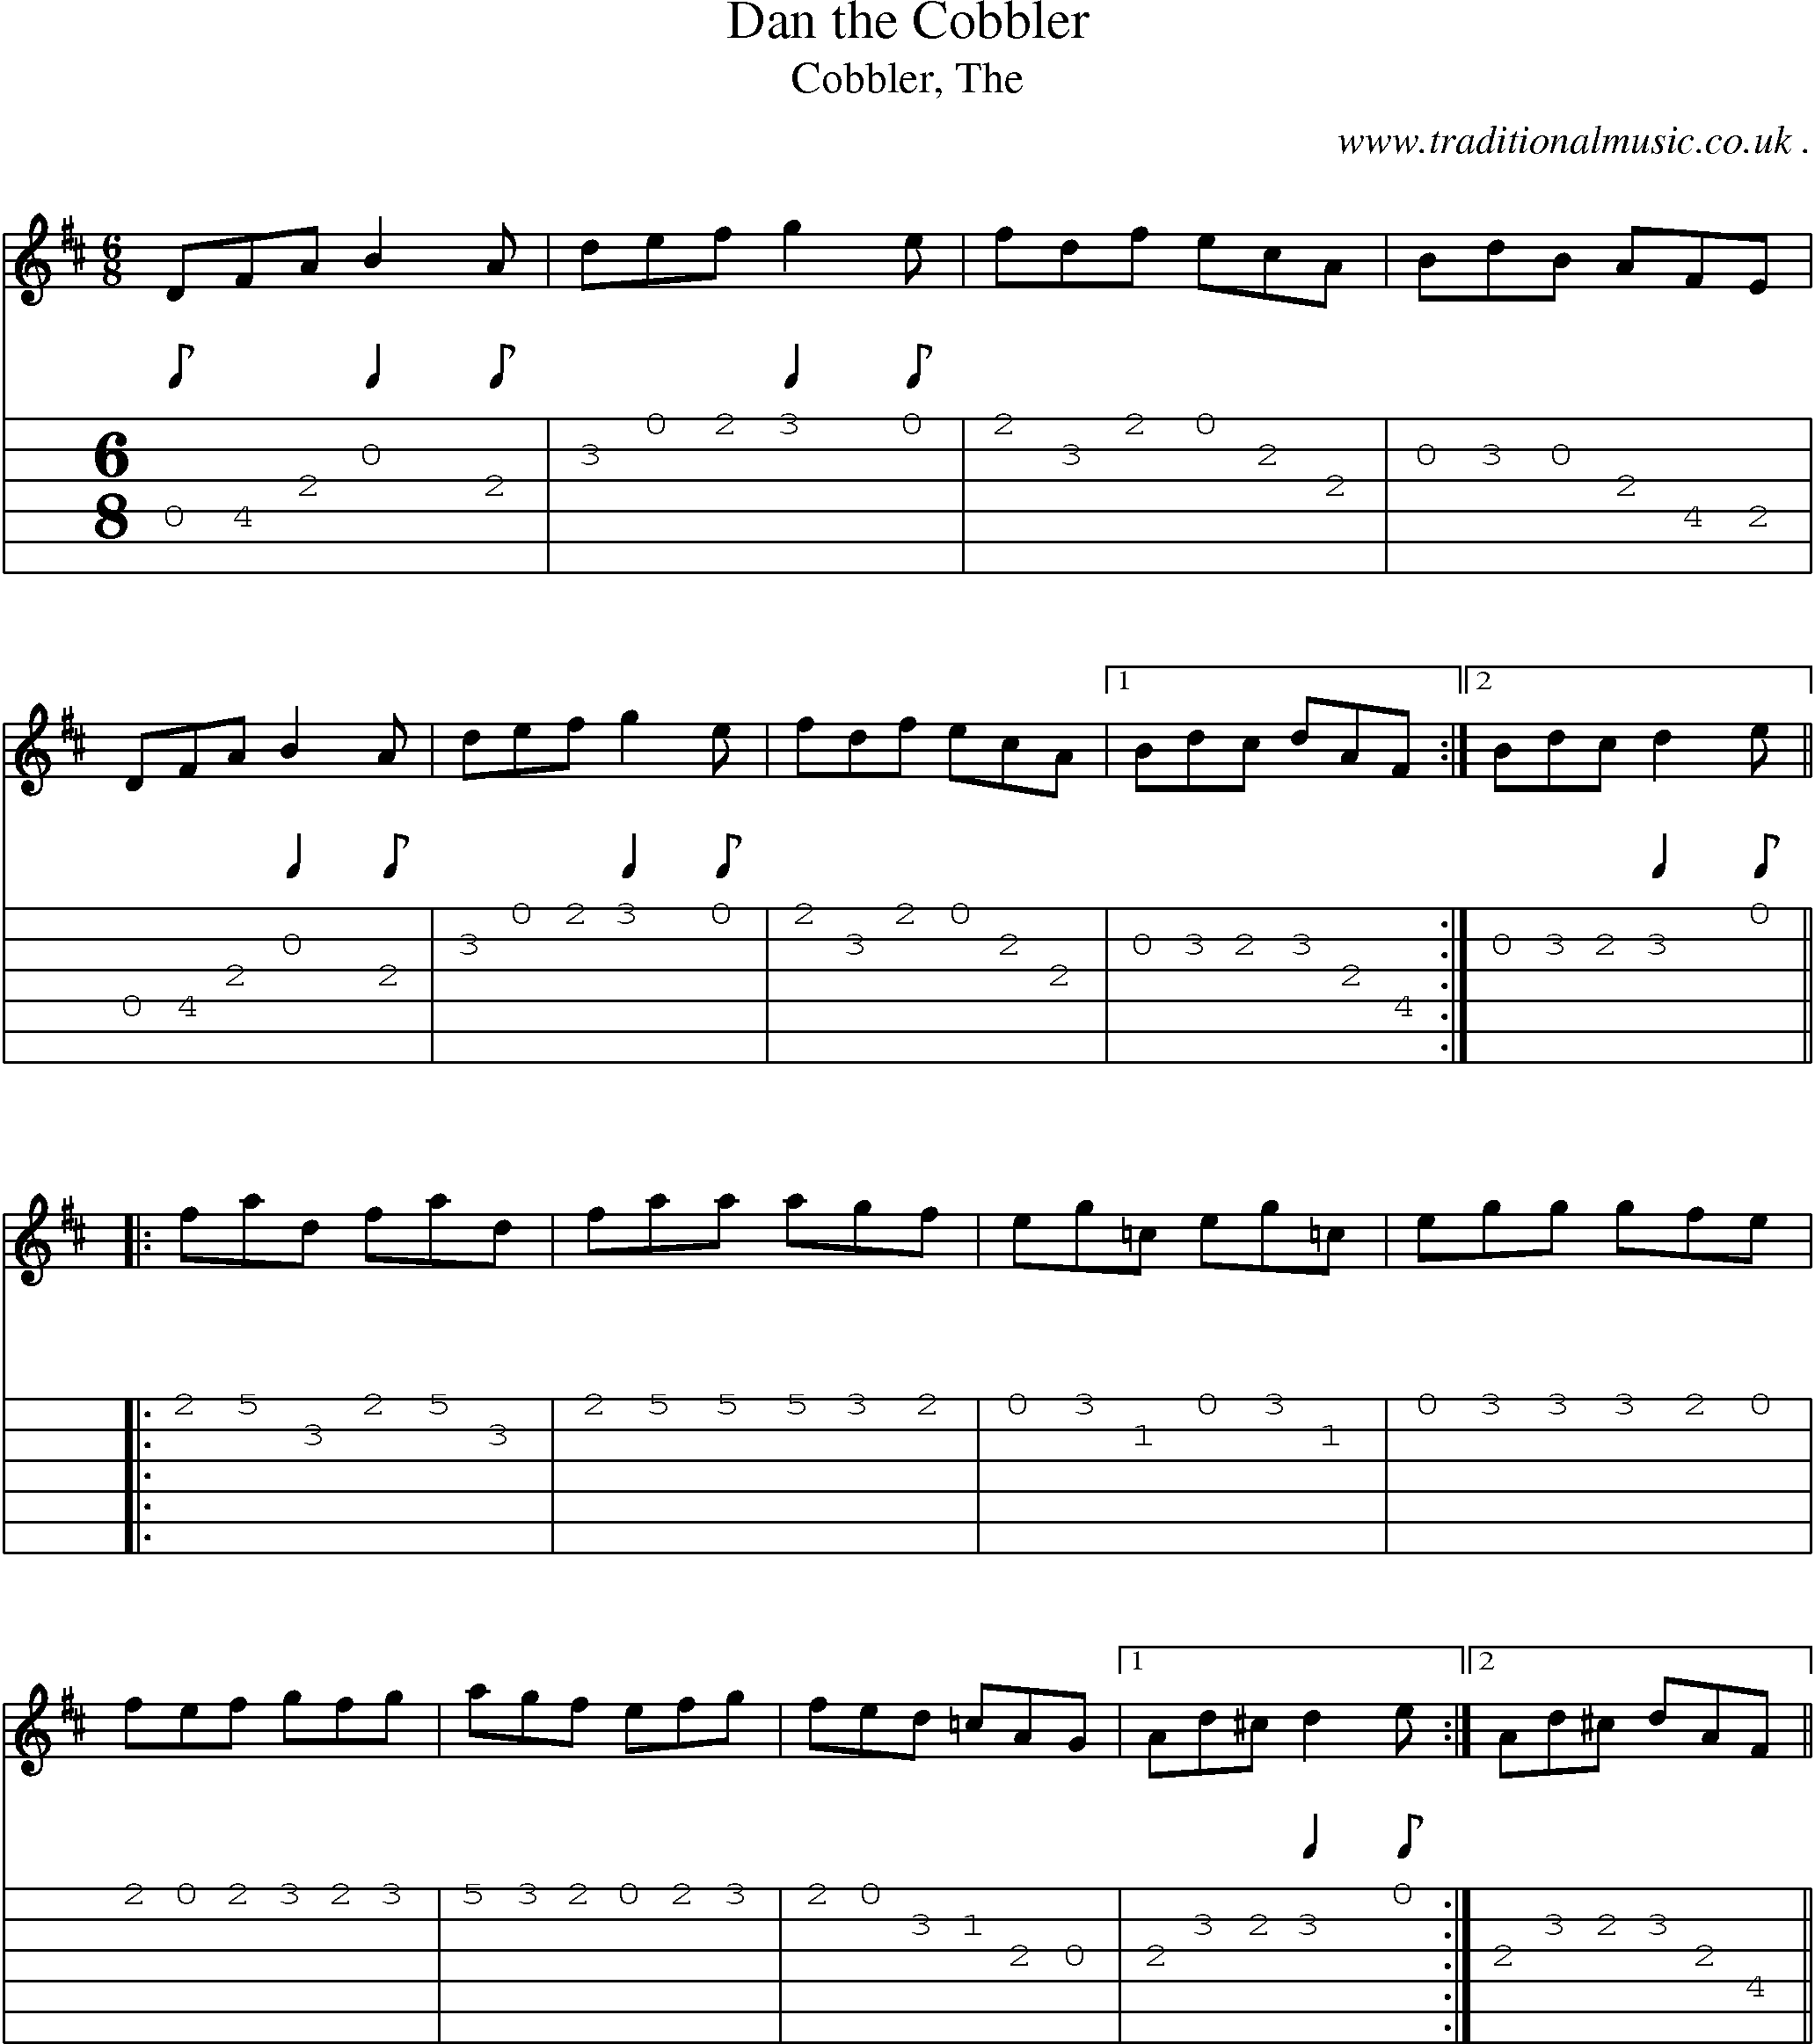 Sheet-music  score, Chords and Guitar Tabs for Dan The Cobbler